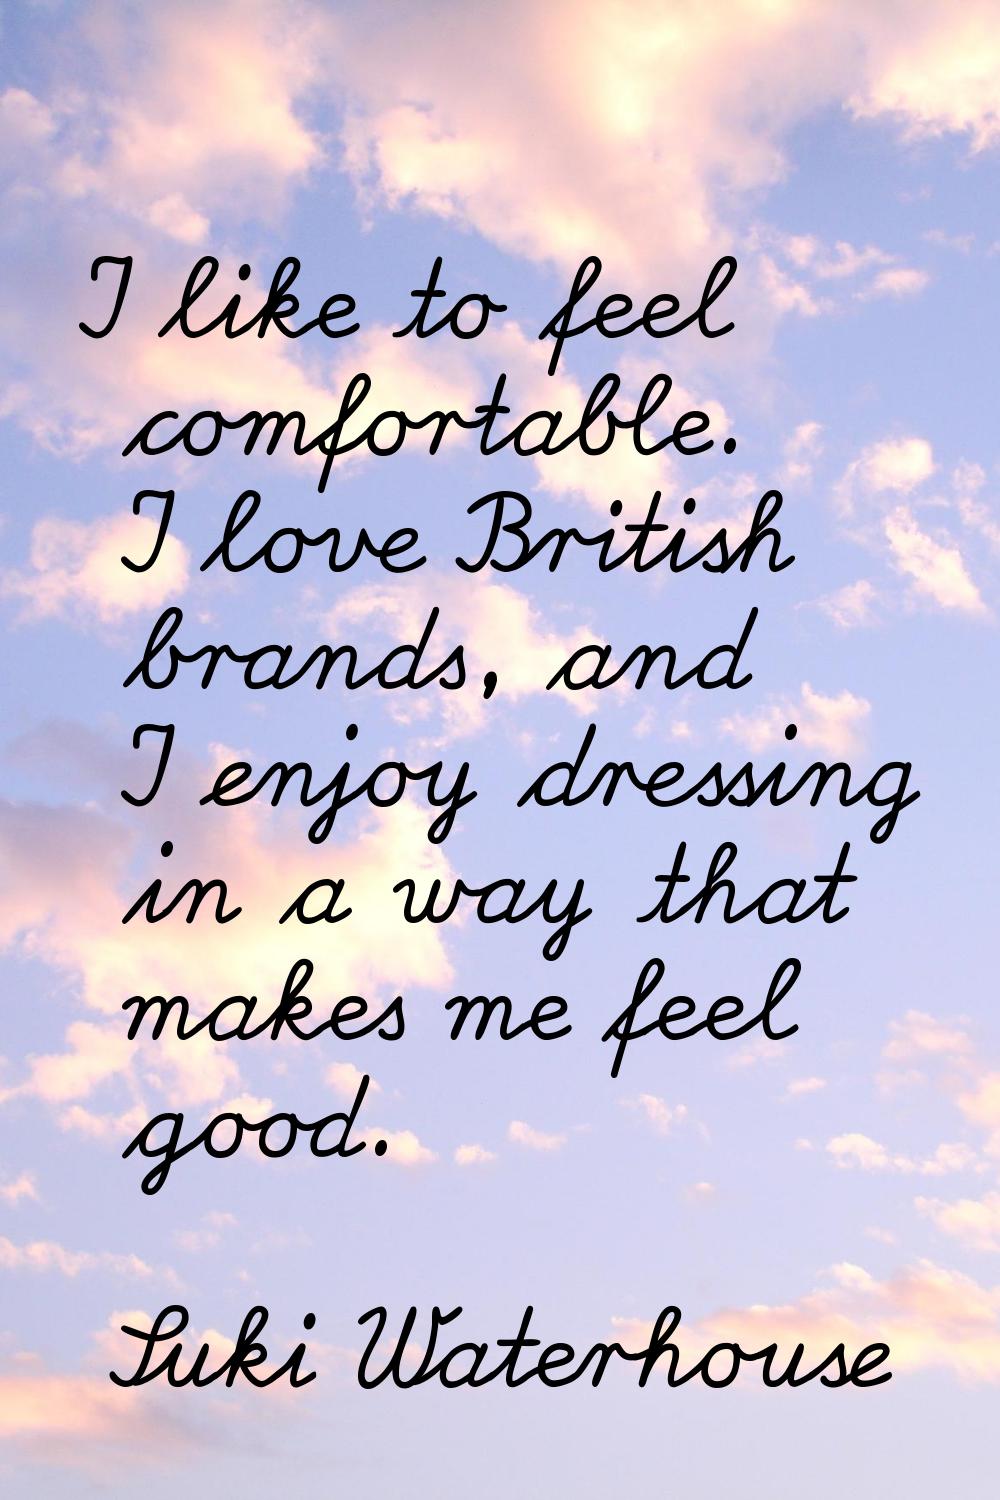 I like to feel comfortable. I love British brands, and I enjoy dressing in a way that makes me feel